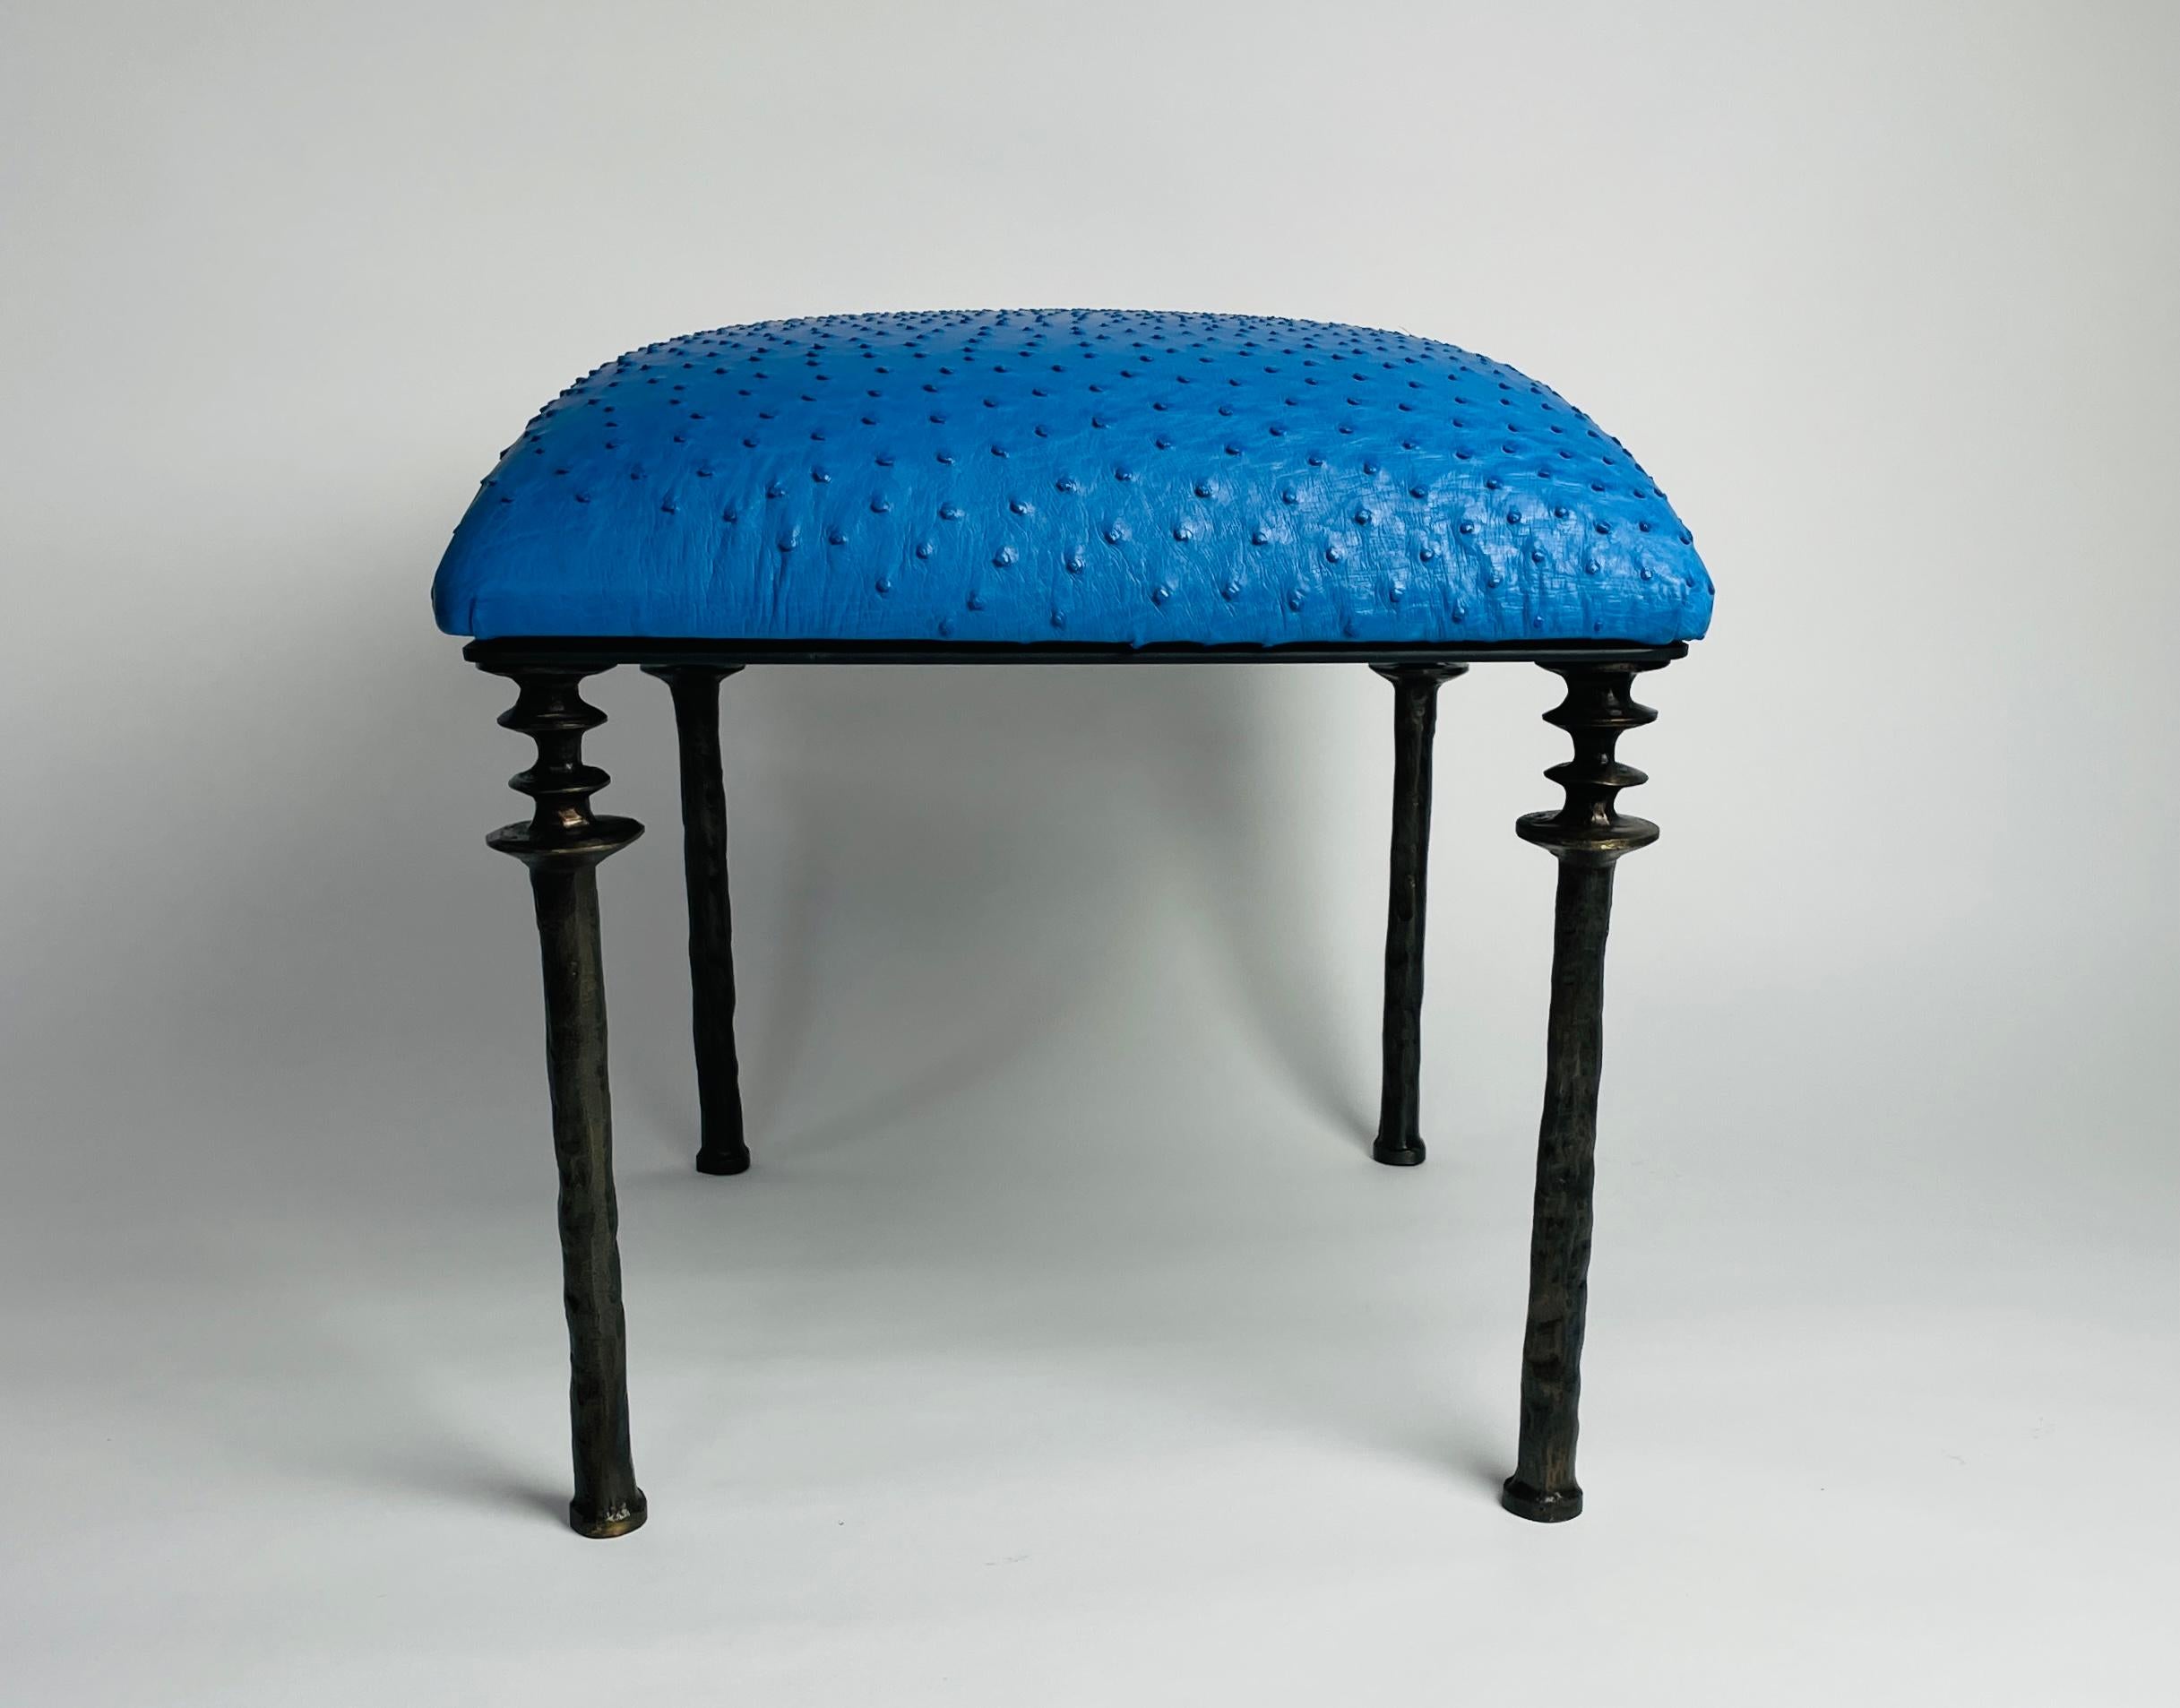 Organic Modern Pair of Sorgue Stools, by Bourgeois Boheme Atelier, Blue Ostrich Leather For Sale